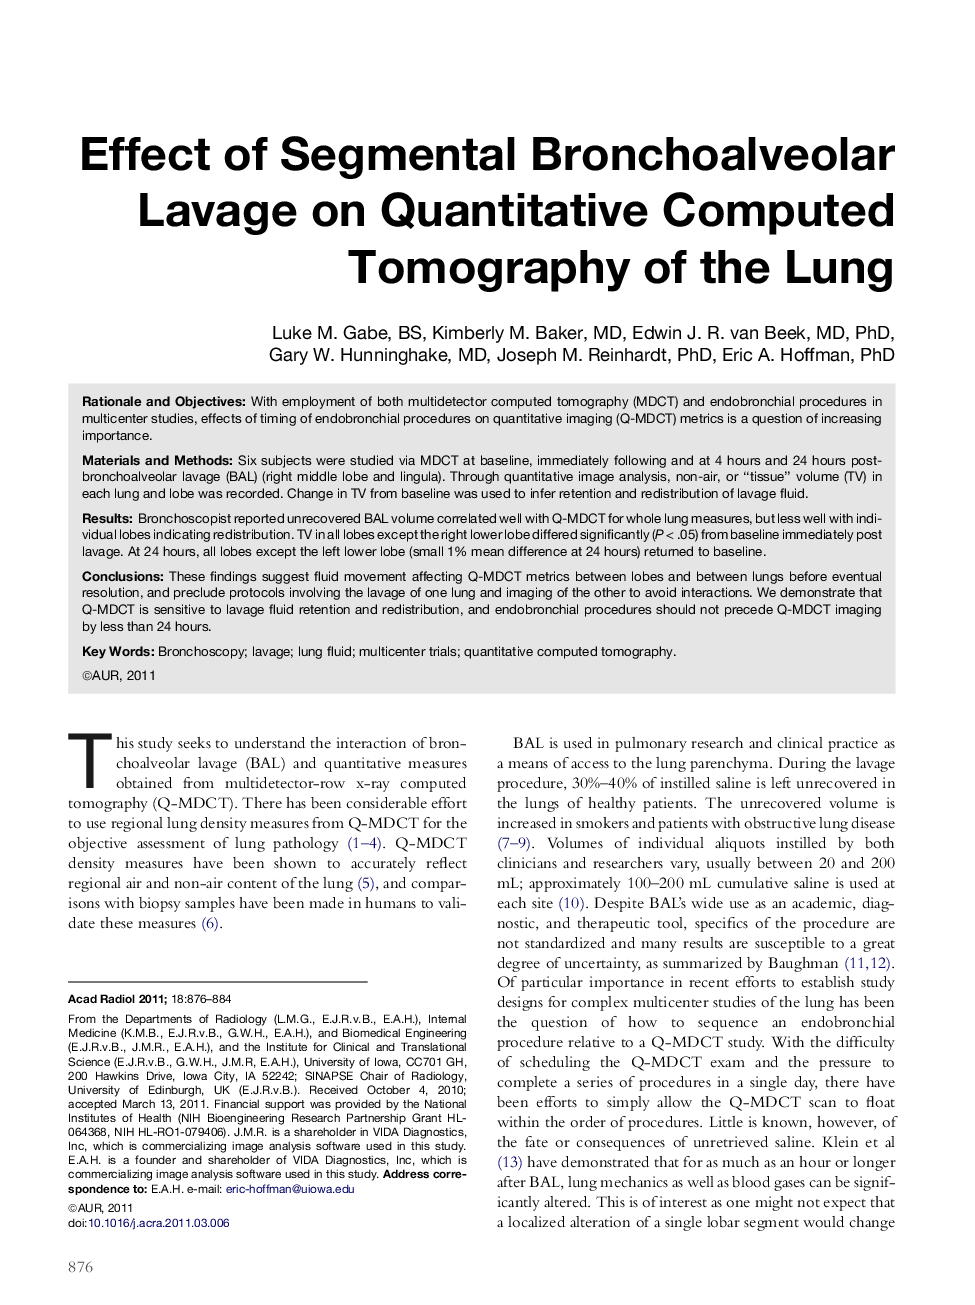 Effect of Segmental Bronchoalveolar Lavage on Quantitative Computed Tomography of the Lung